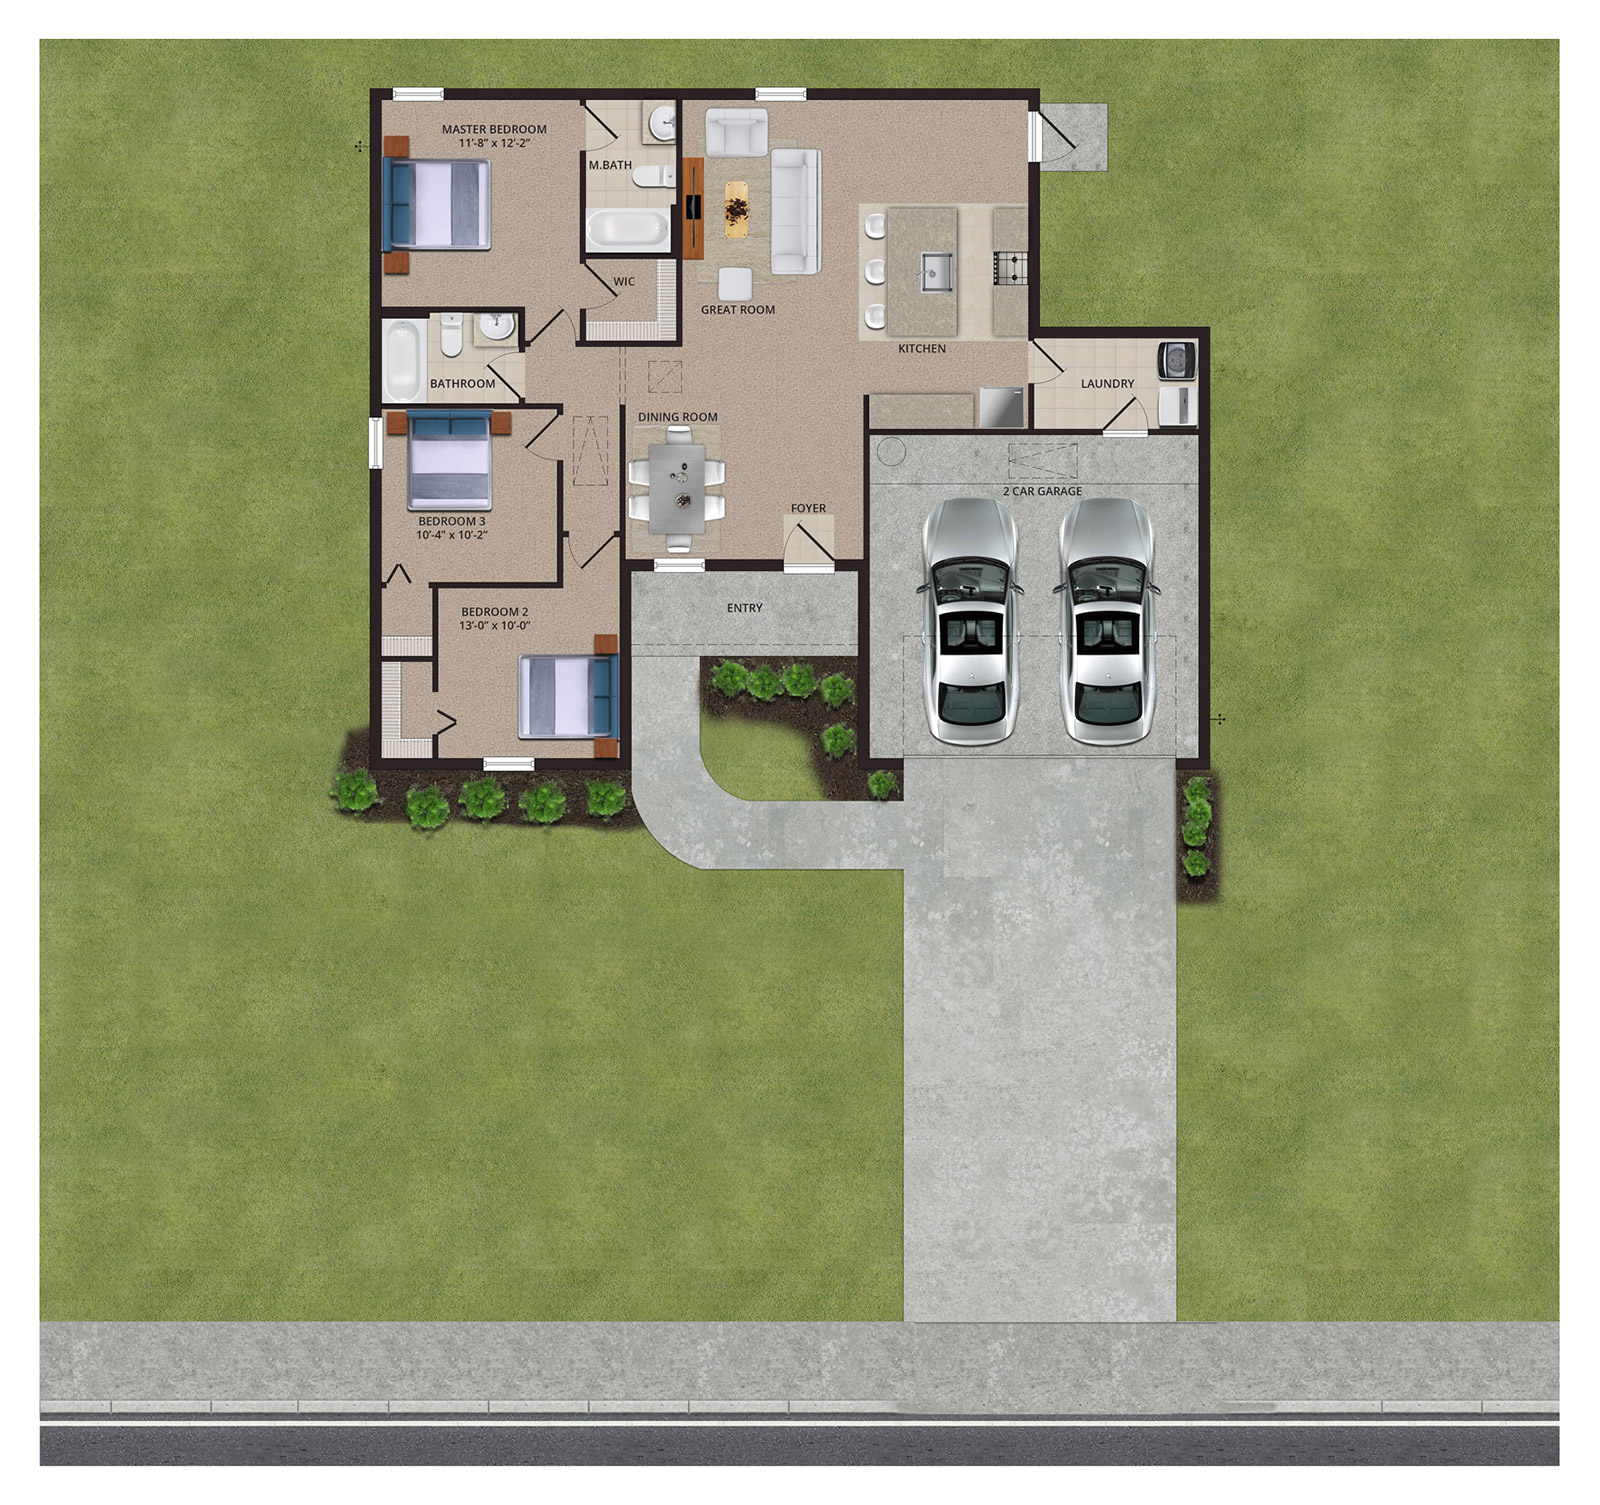 EcoSun-Homes-Floor-Plan-Light-Box-Images-Expanded-View-1600x1505-1251A-Grigio